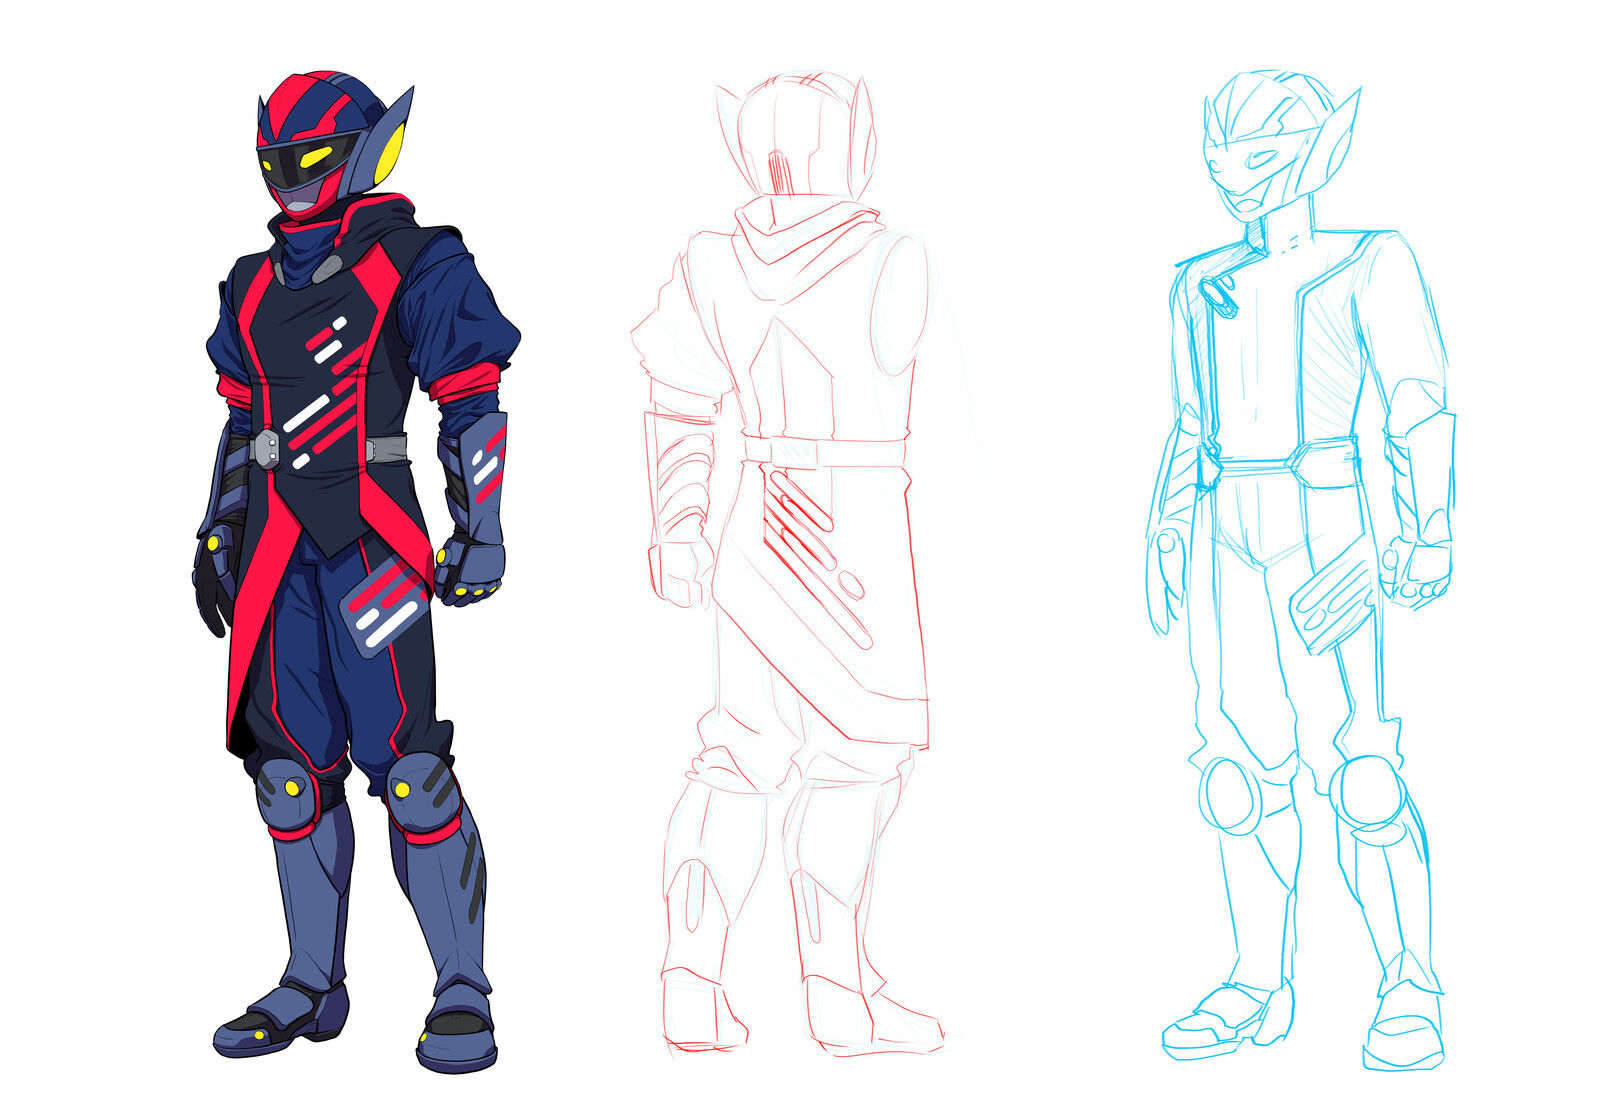 A design for the undersuit.